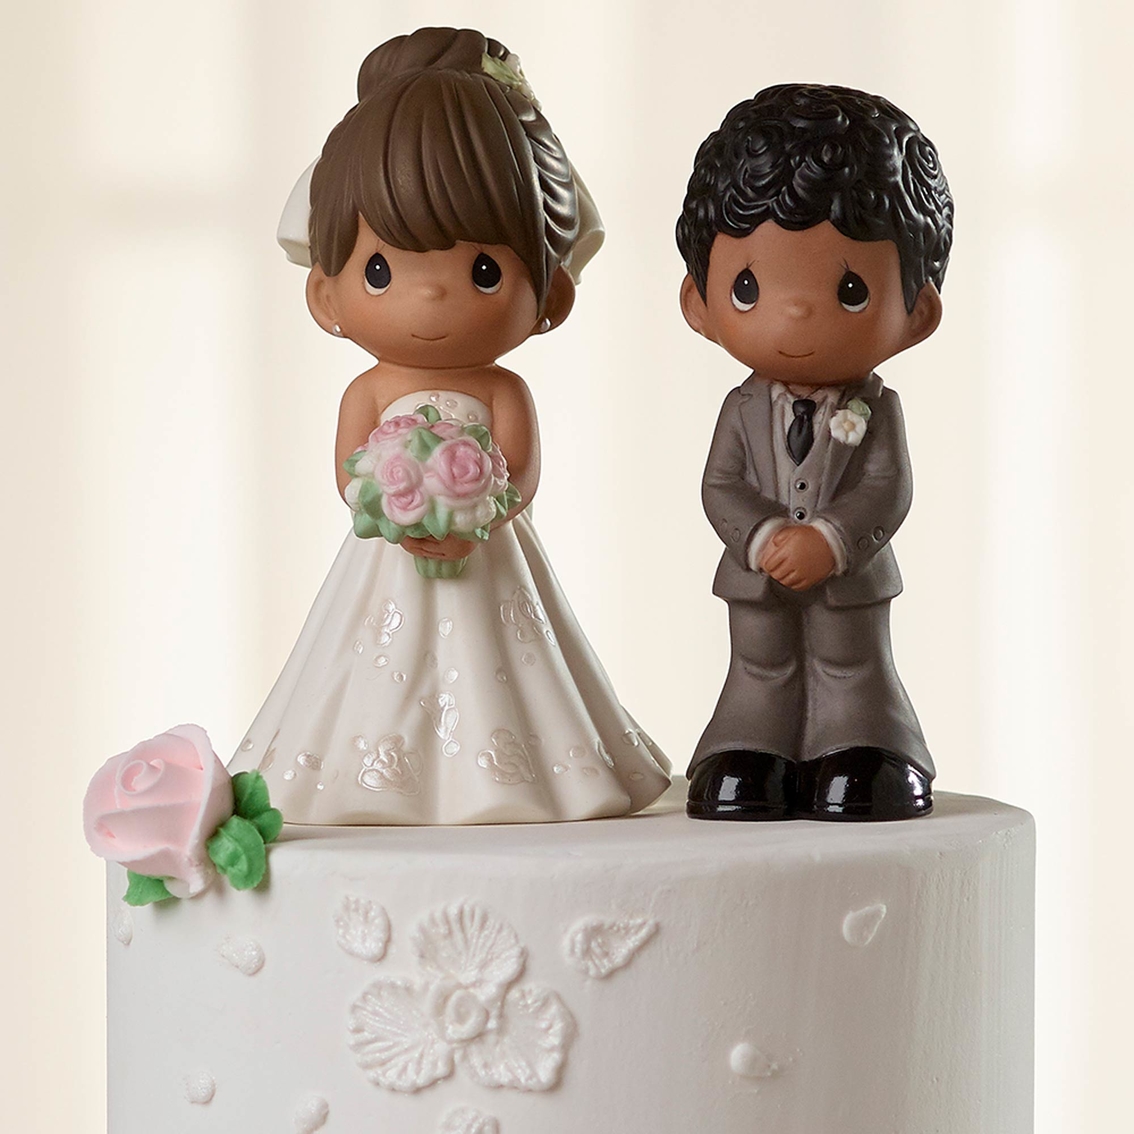 Precious Moments Mix and Match Bride Wedding Cake Topper, Brown Hair / Light Skin - Image 3 of 4